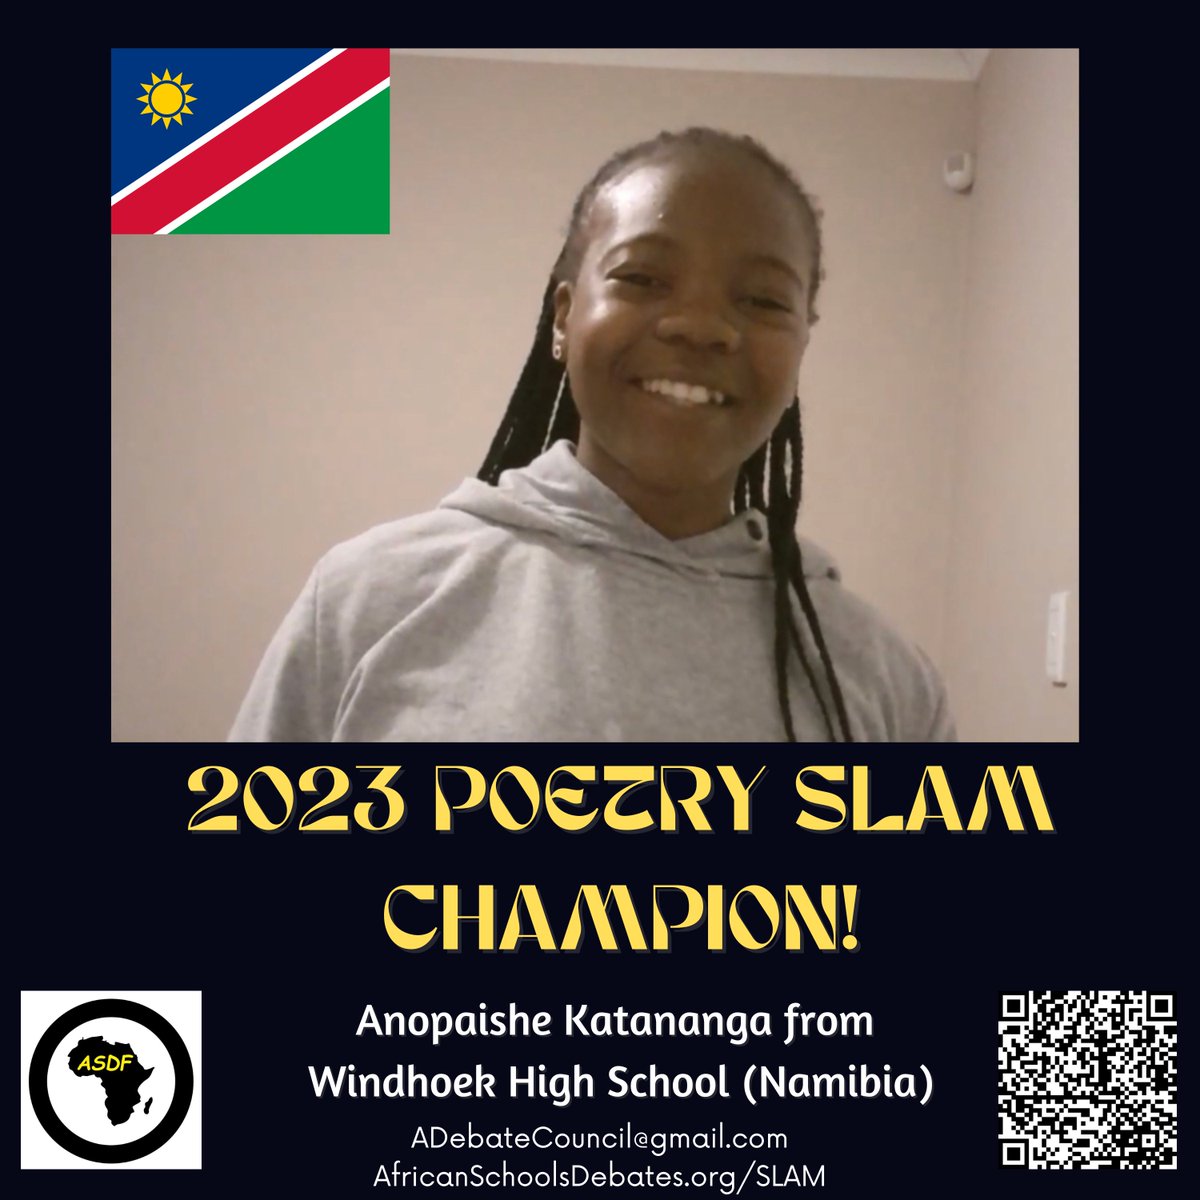 Congratulations to the 2023 ASDF Poetry Slam Champion: Anopaishe Katananga from Namibia!

Check out her very impressive slam video! youtu.be/35JCI69joZ8

#PoetrySlam #Poet #Poetry #AfricanPoets